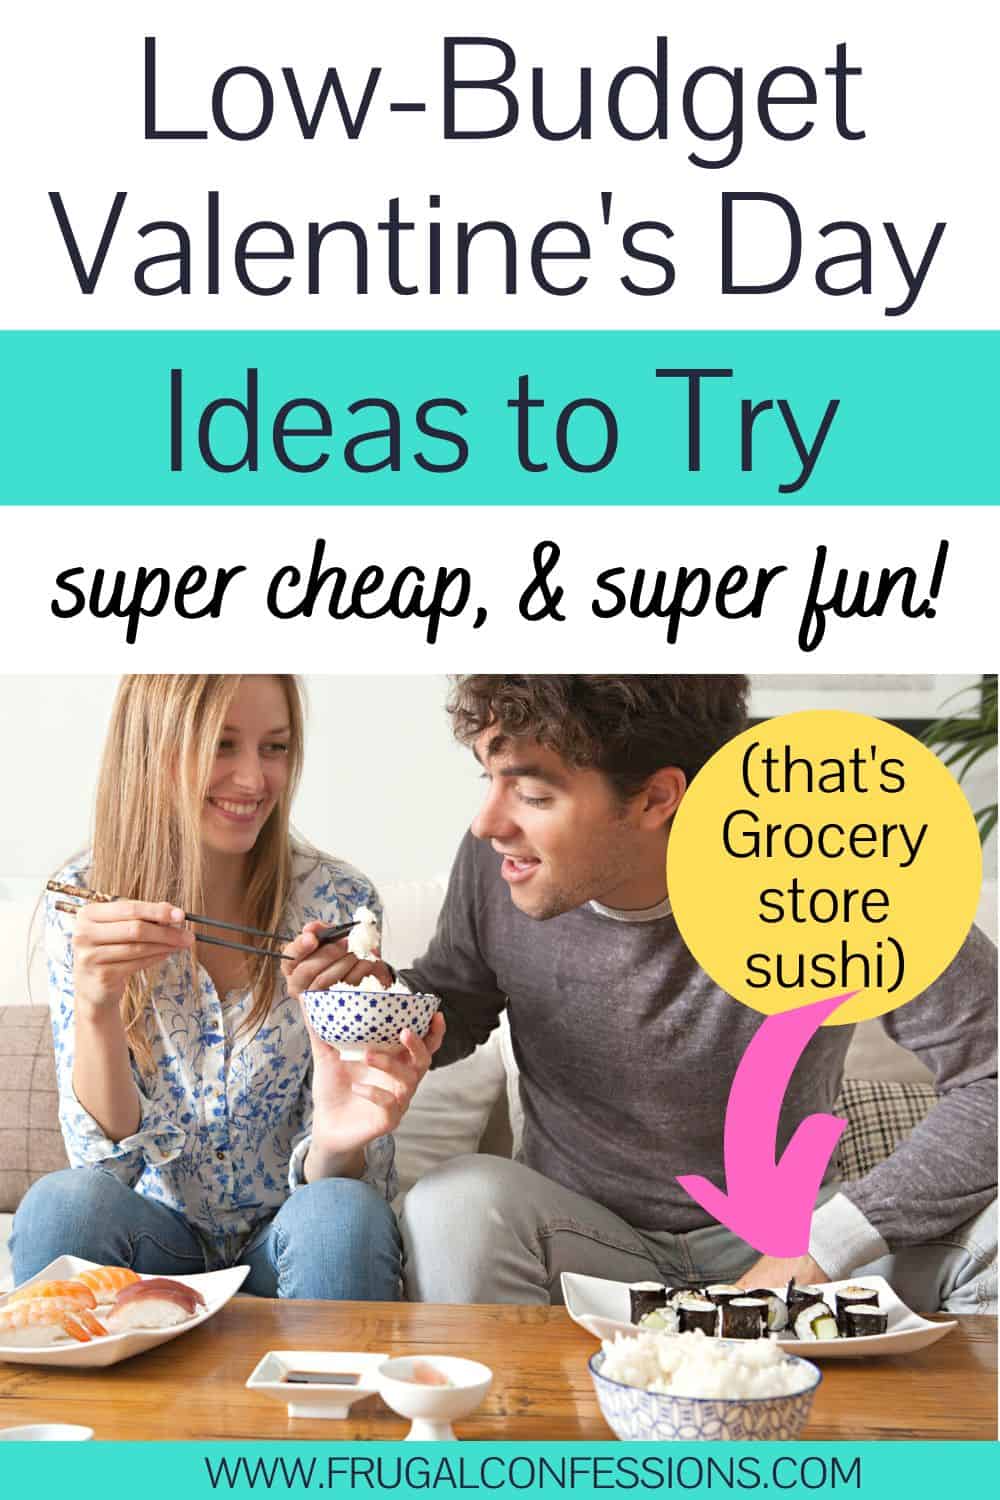 guy and girl eating grocery store sushi, text overlay "low budget Valentine's Day ideas to try"